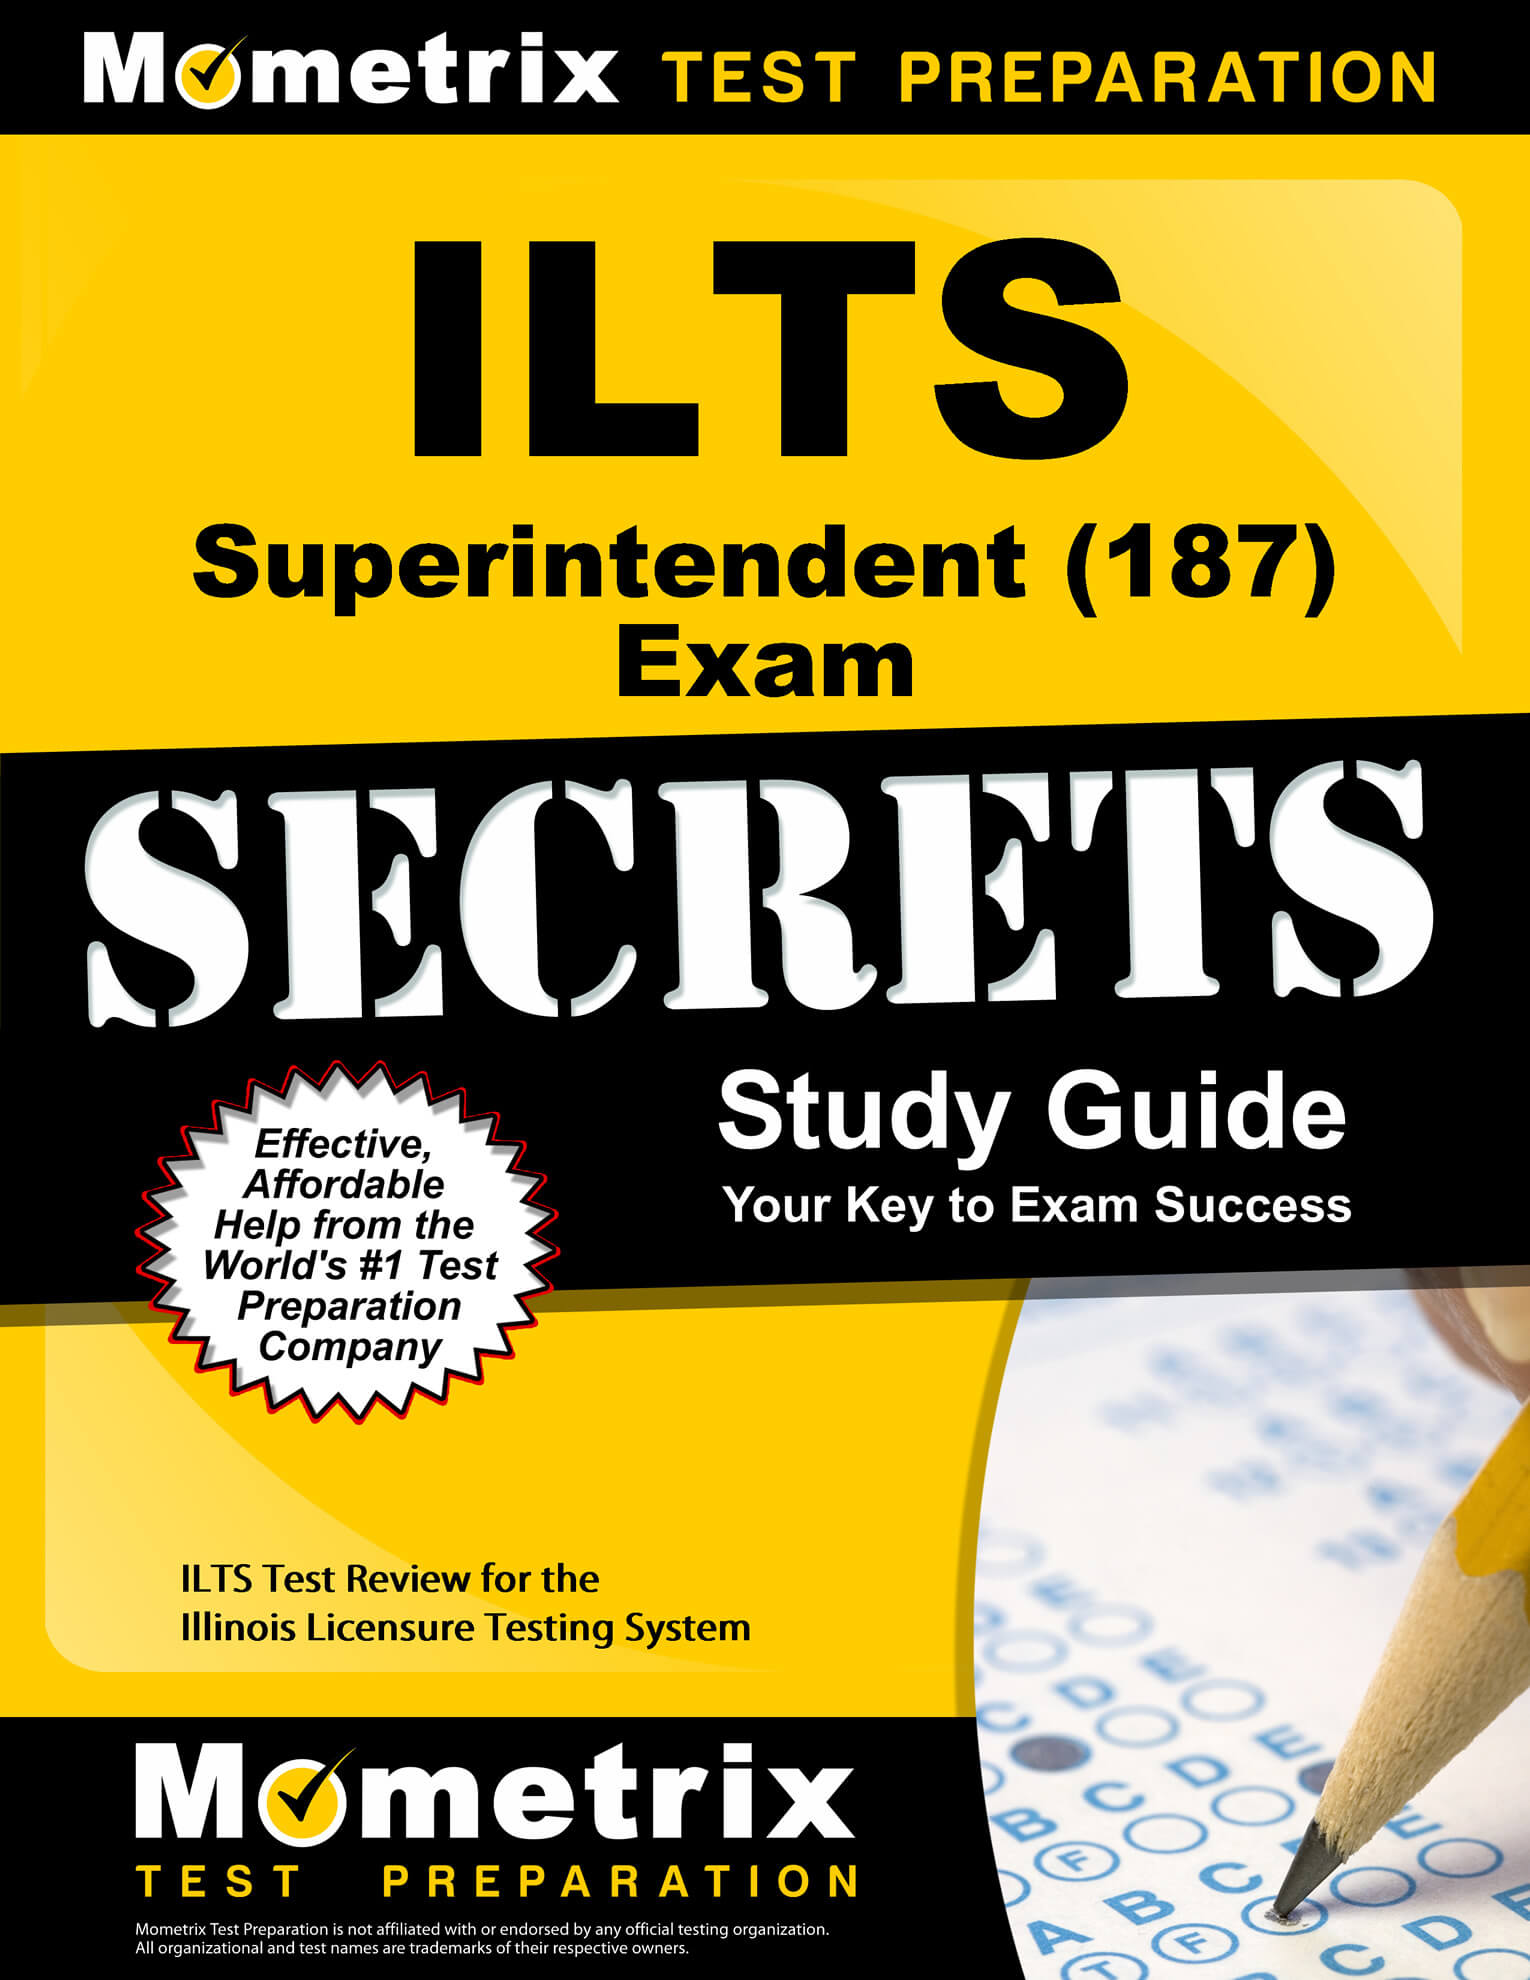 ILTS Superintendent Study Guide